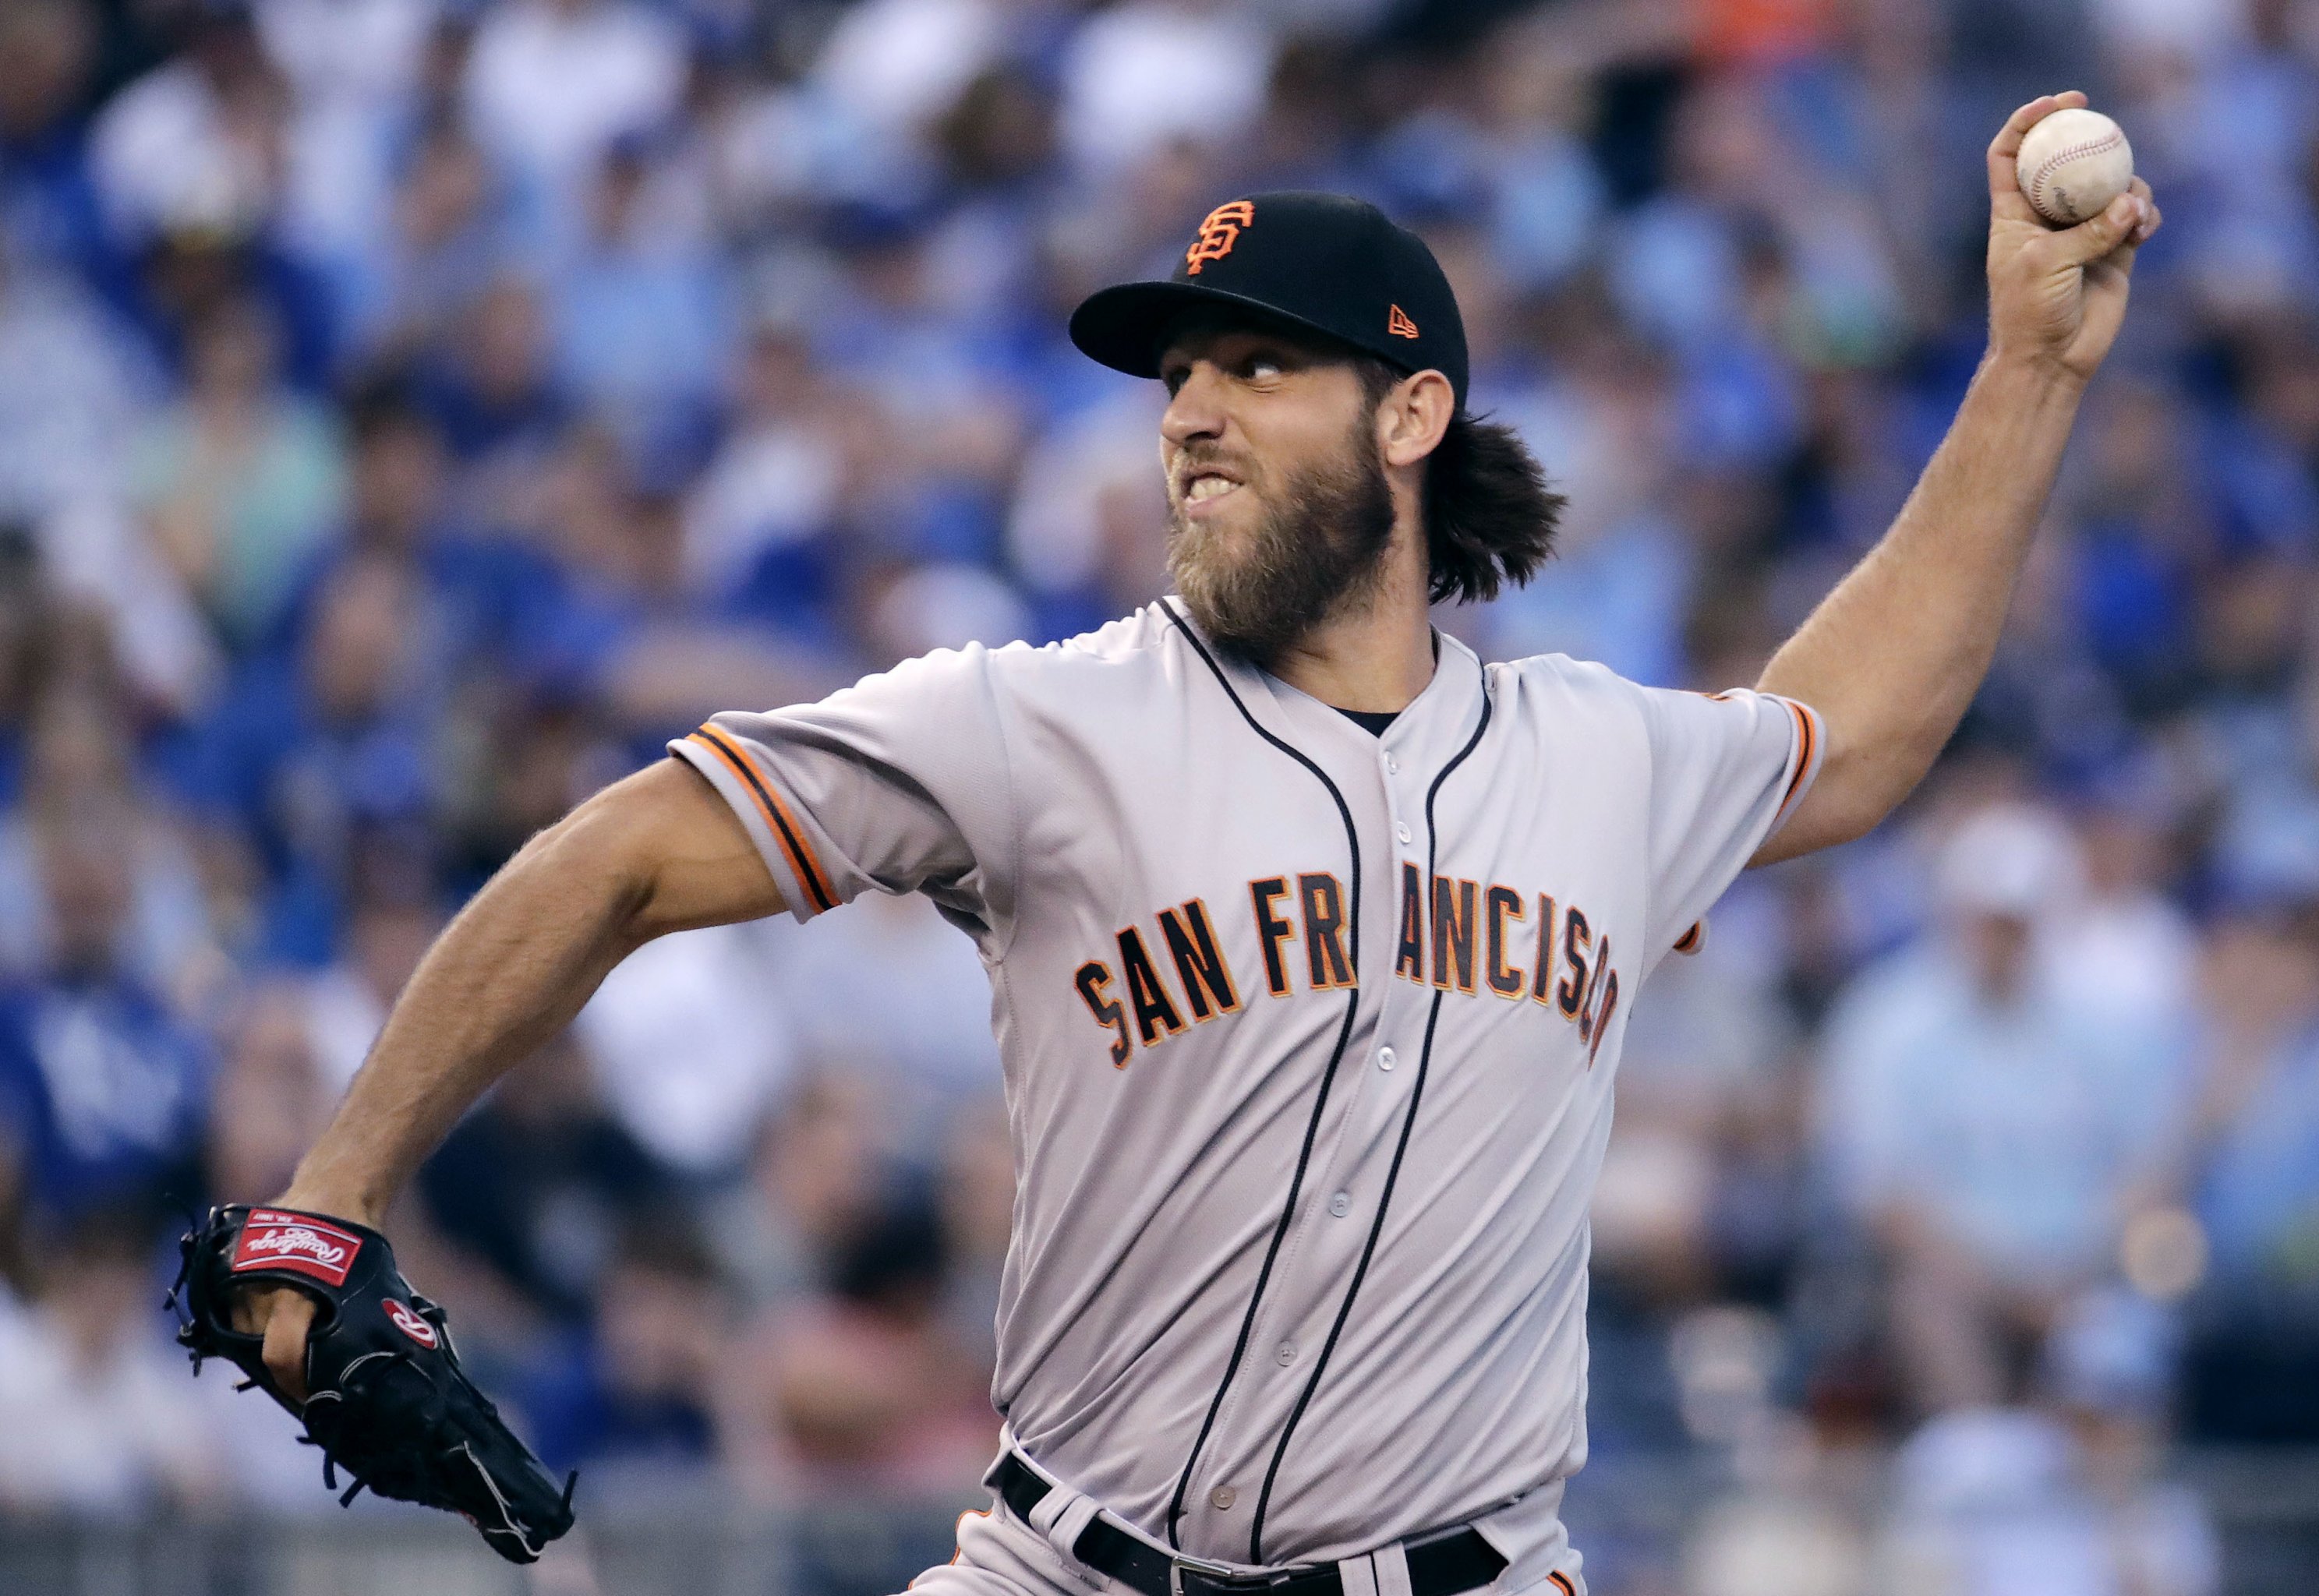 Madison Bumgarner Calls Own Pitches, Discusses Rule Changes